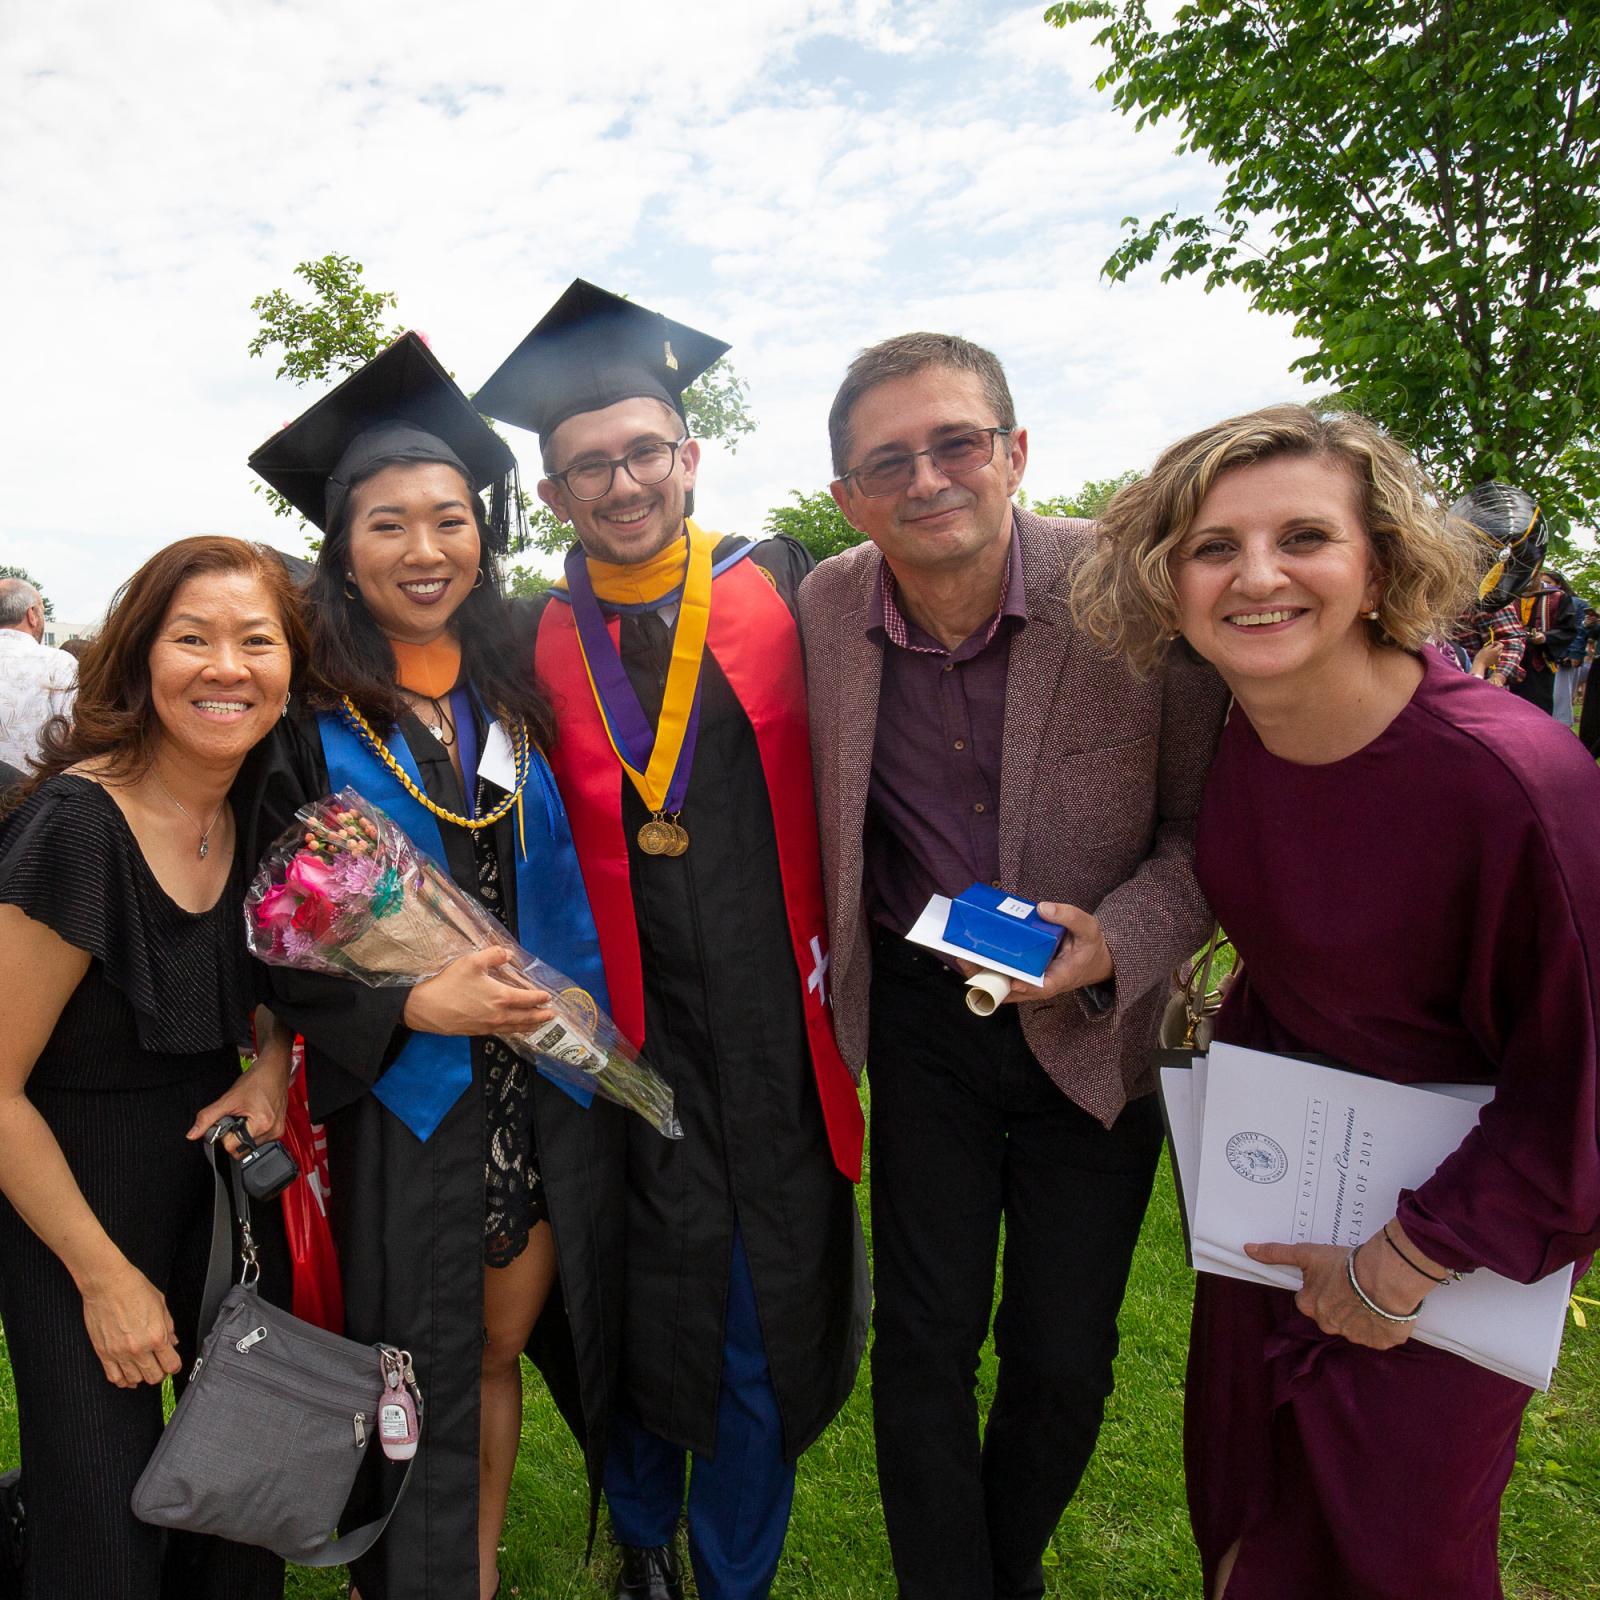 Pace student at his Commencement ceremony with his family, smiling at the camera.